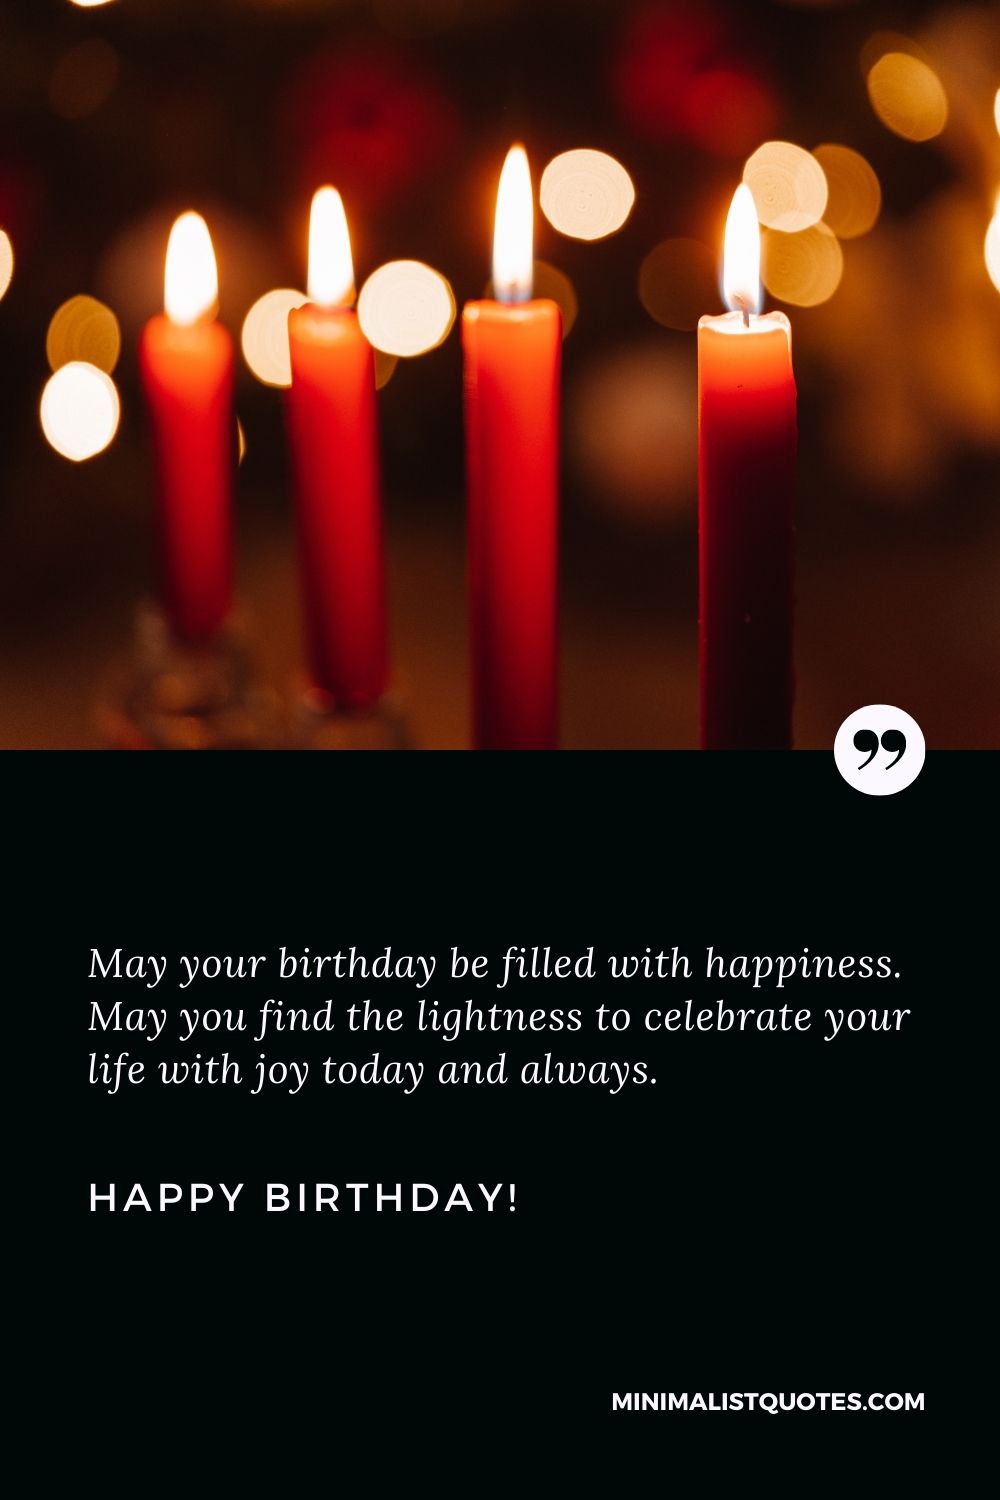 Happy birthday sister quotes: May your birthday be filled with happiness. May you find the lightness to celebrate your life with joy today and always. Happy Birthday!